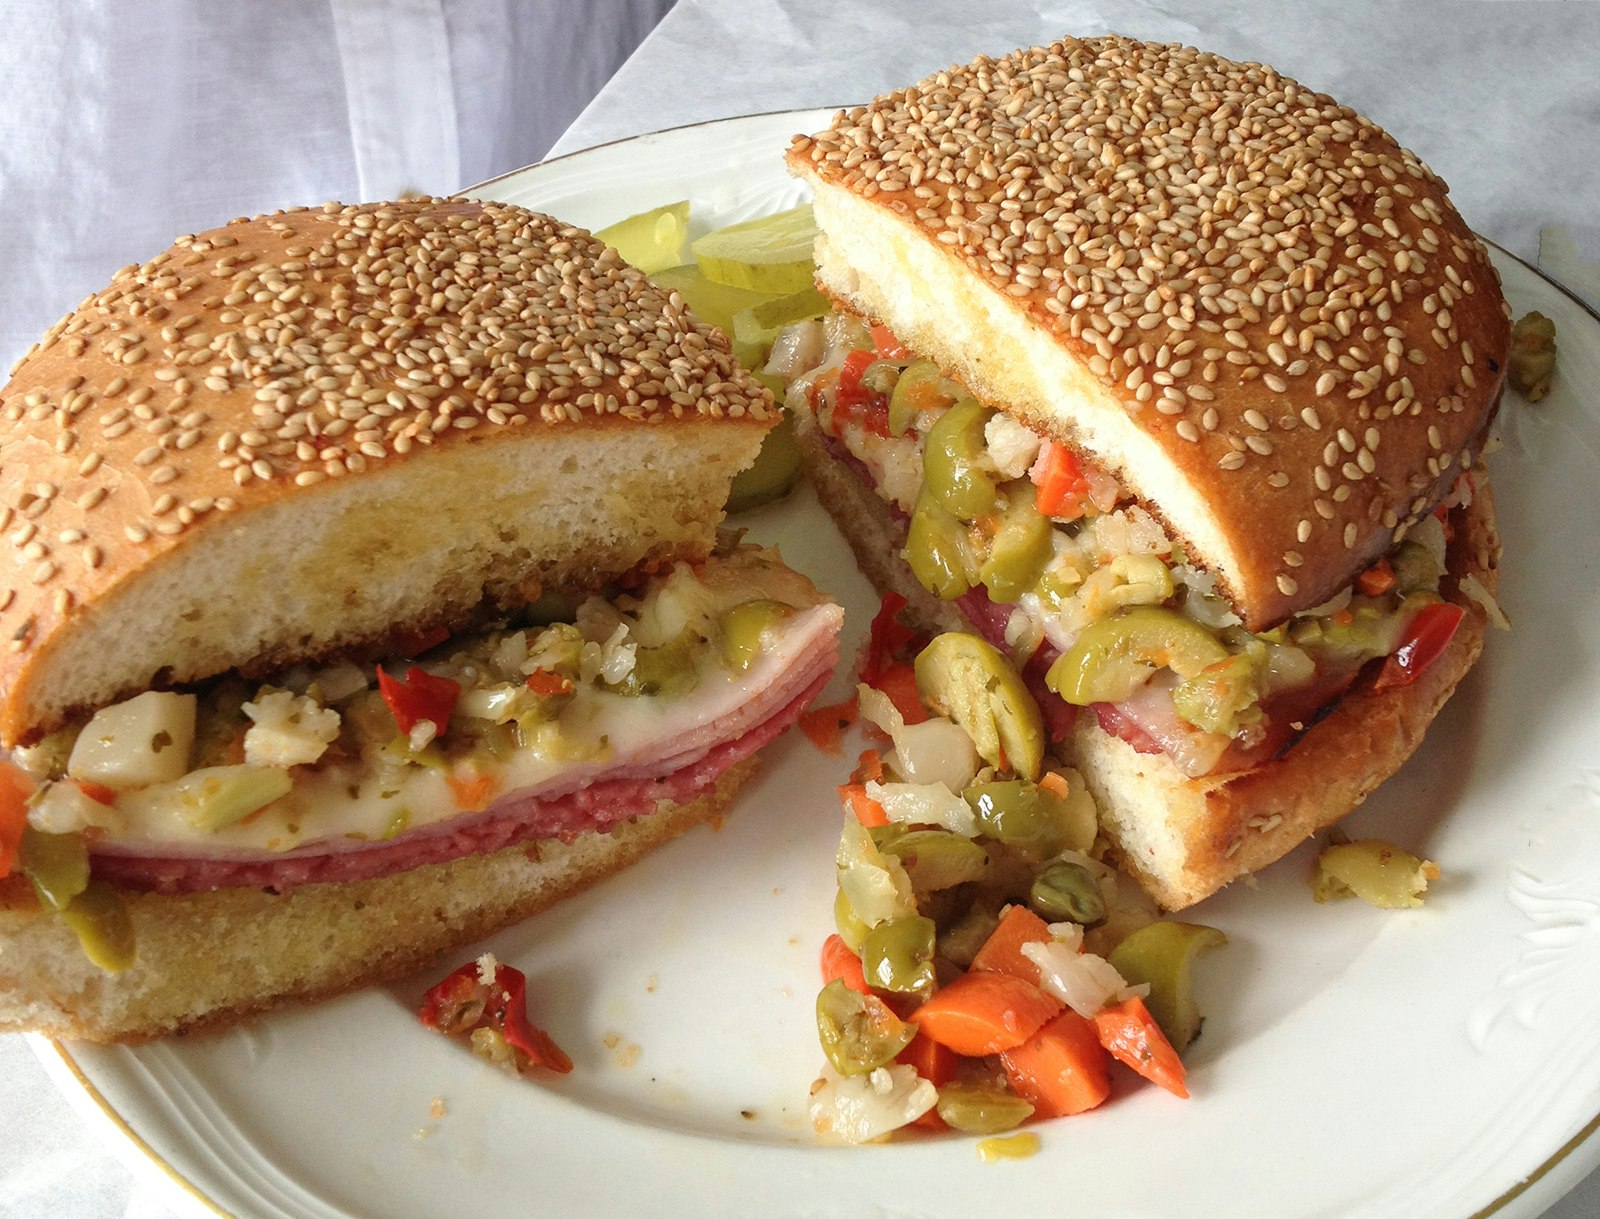 close-up of a muffuletta sandwich – piled with Italian meats and olive tapenade, on a sesame seed bun – on a white plate in New Orleans